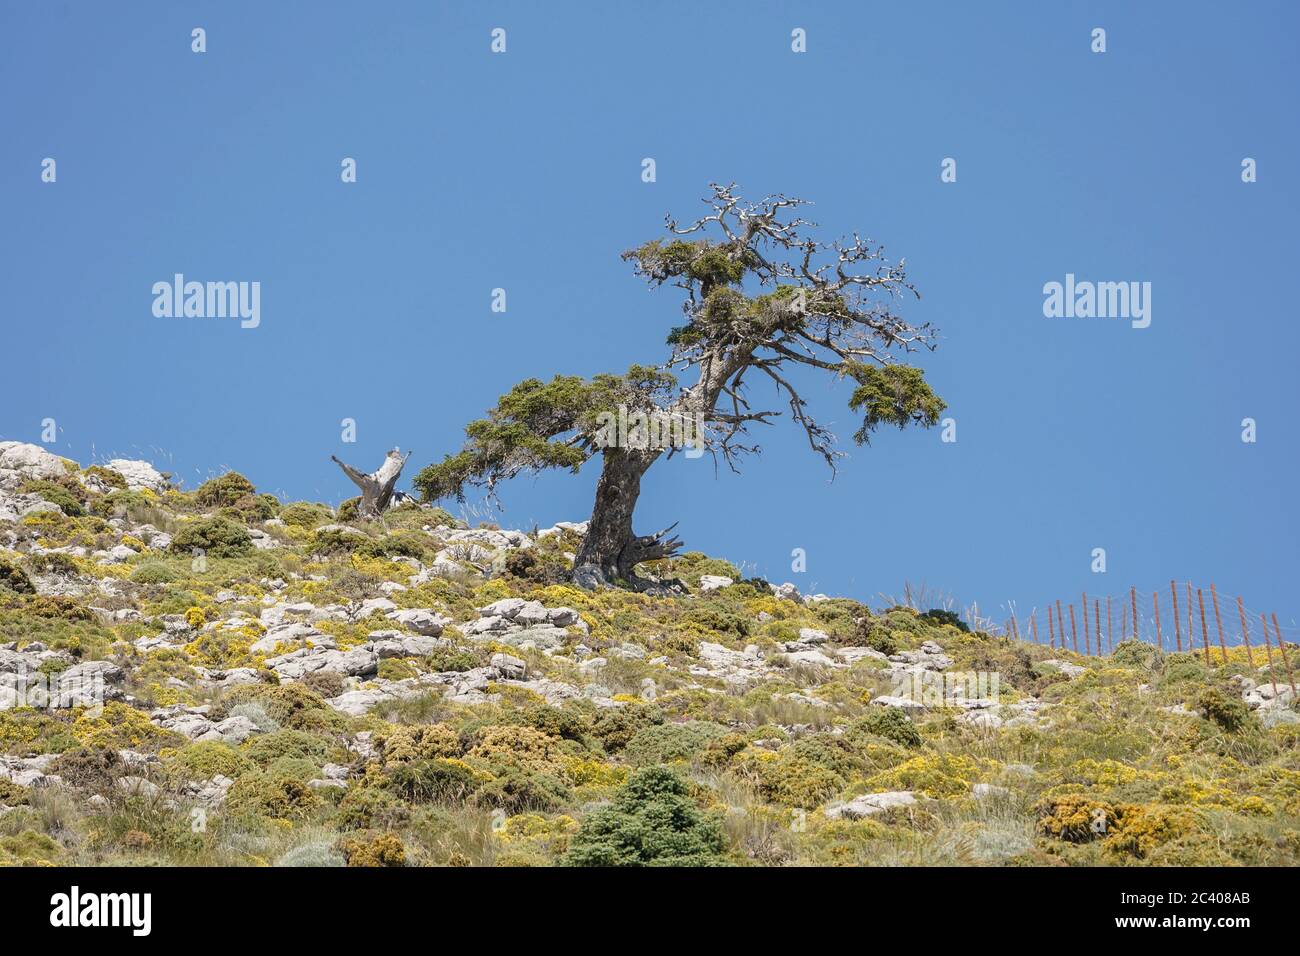 Sierra de las Nieves Natural Park, Old spanish fir tree (Abies pinsapo)  Biosphere Reserve., Malaga province. Andalusia, Southern Spain. Europe. Stock Photo